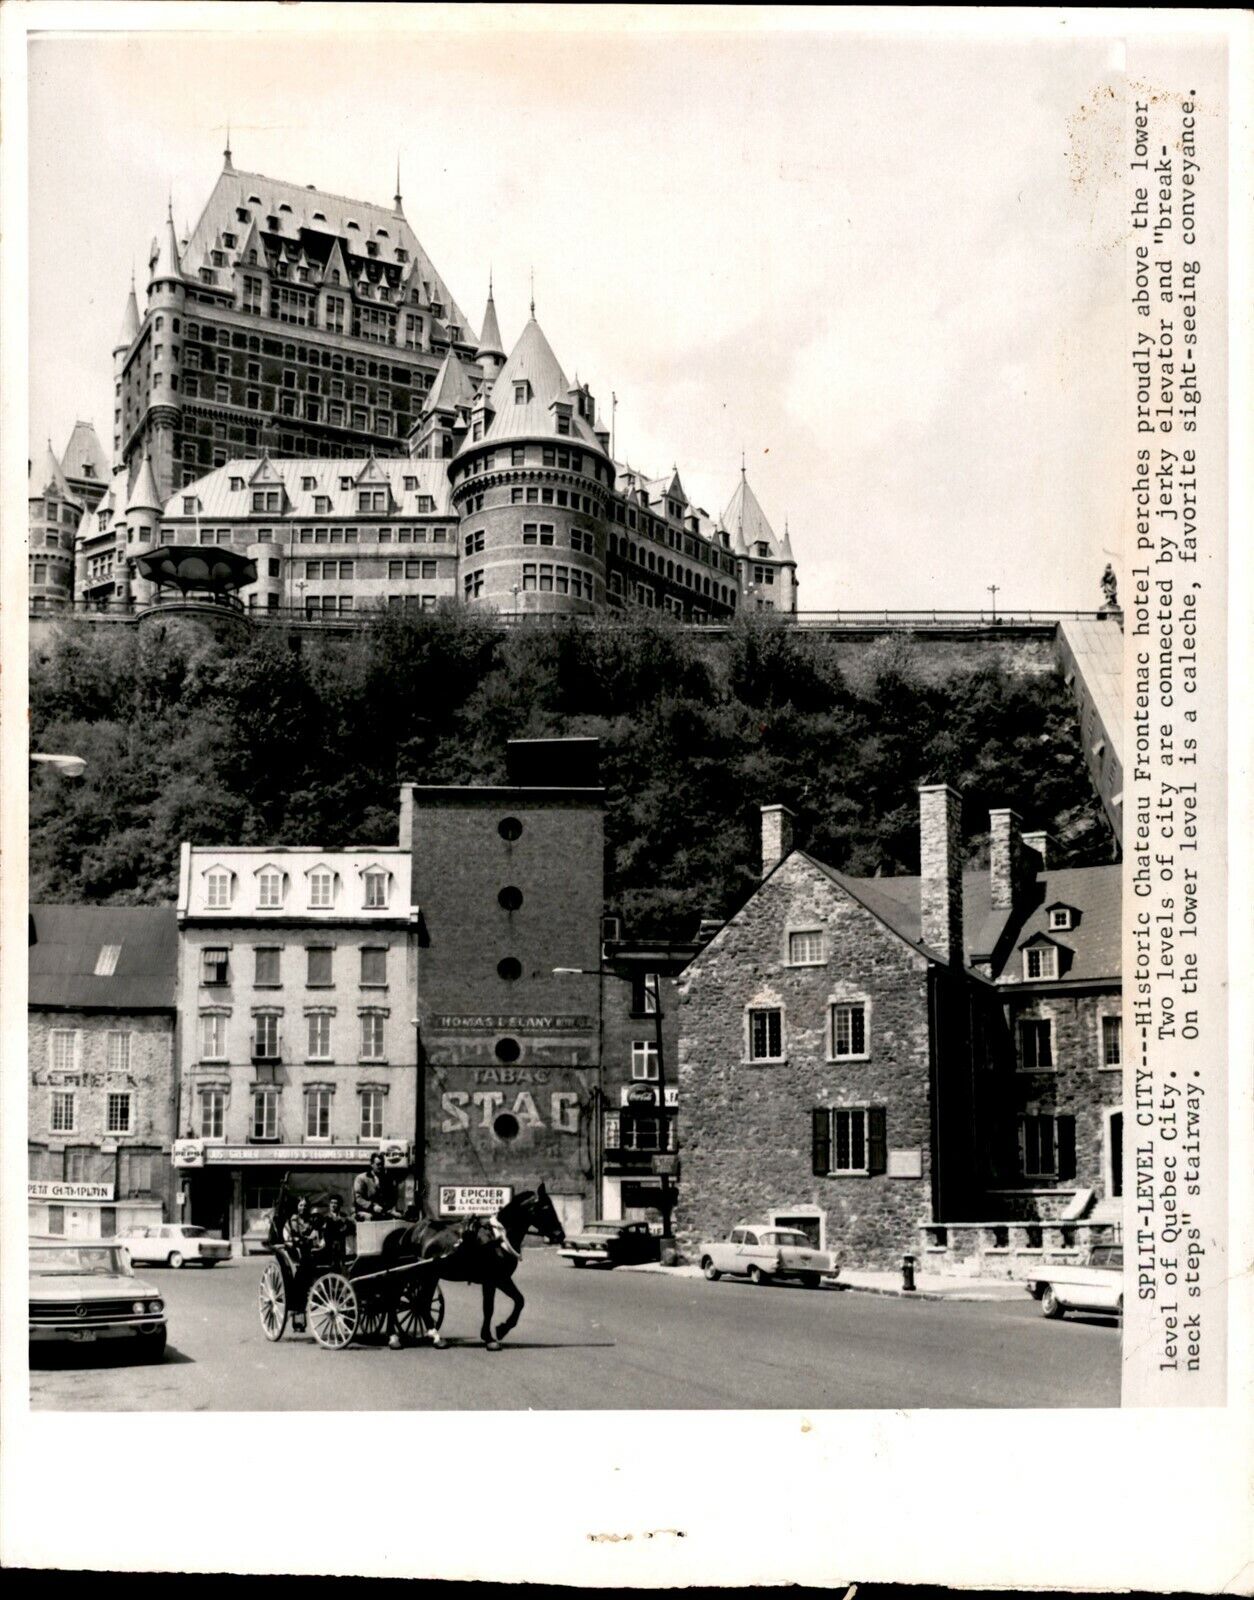 LG916 1968 Wire Photo HISTORIC CHATEAU FRONTENAC HOTEL QUEBEC CITY ARCHITECTURE